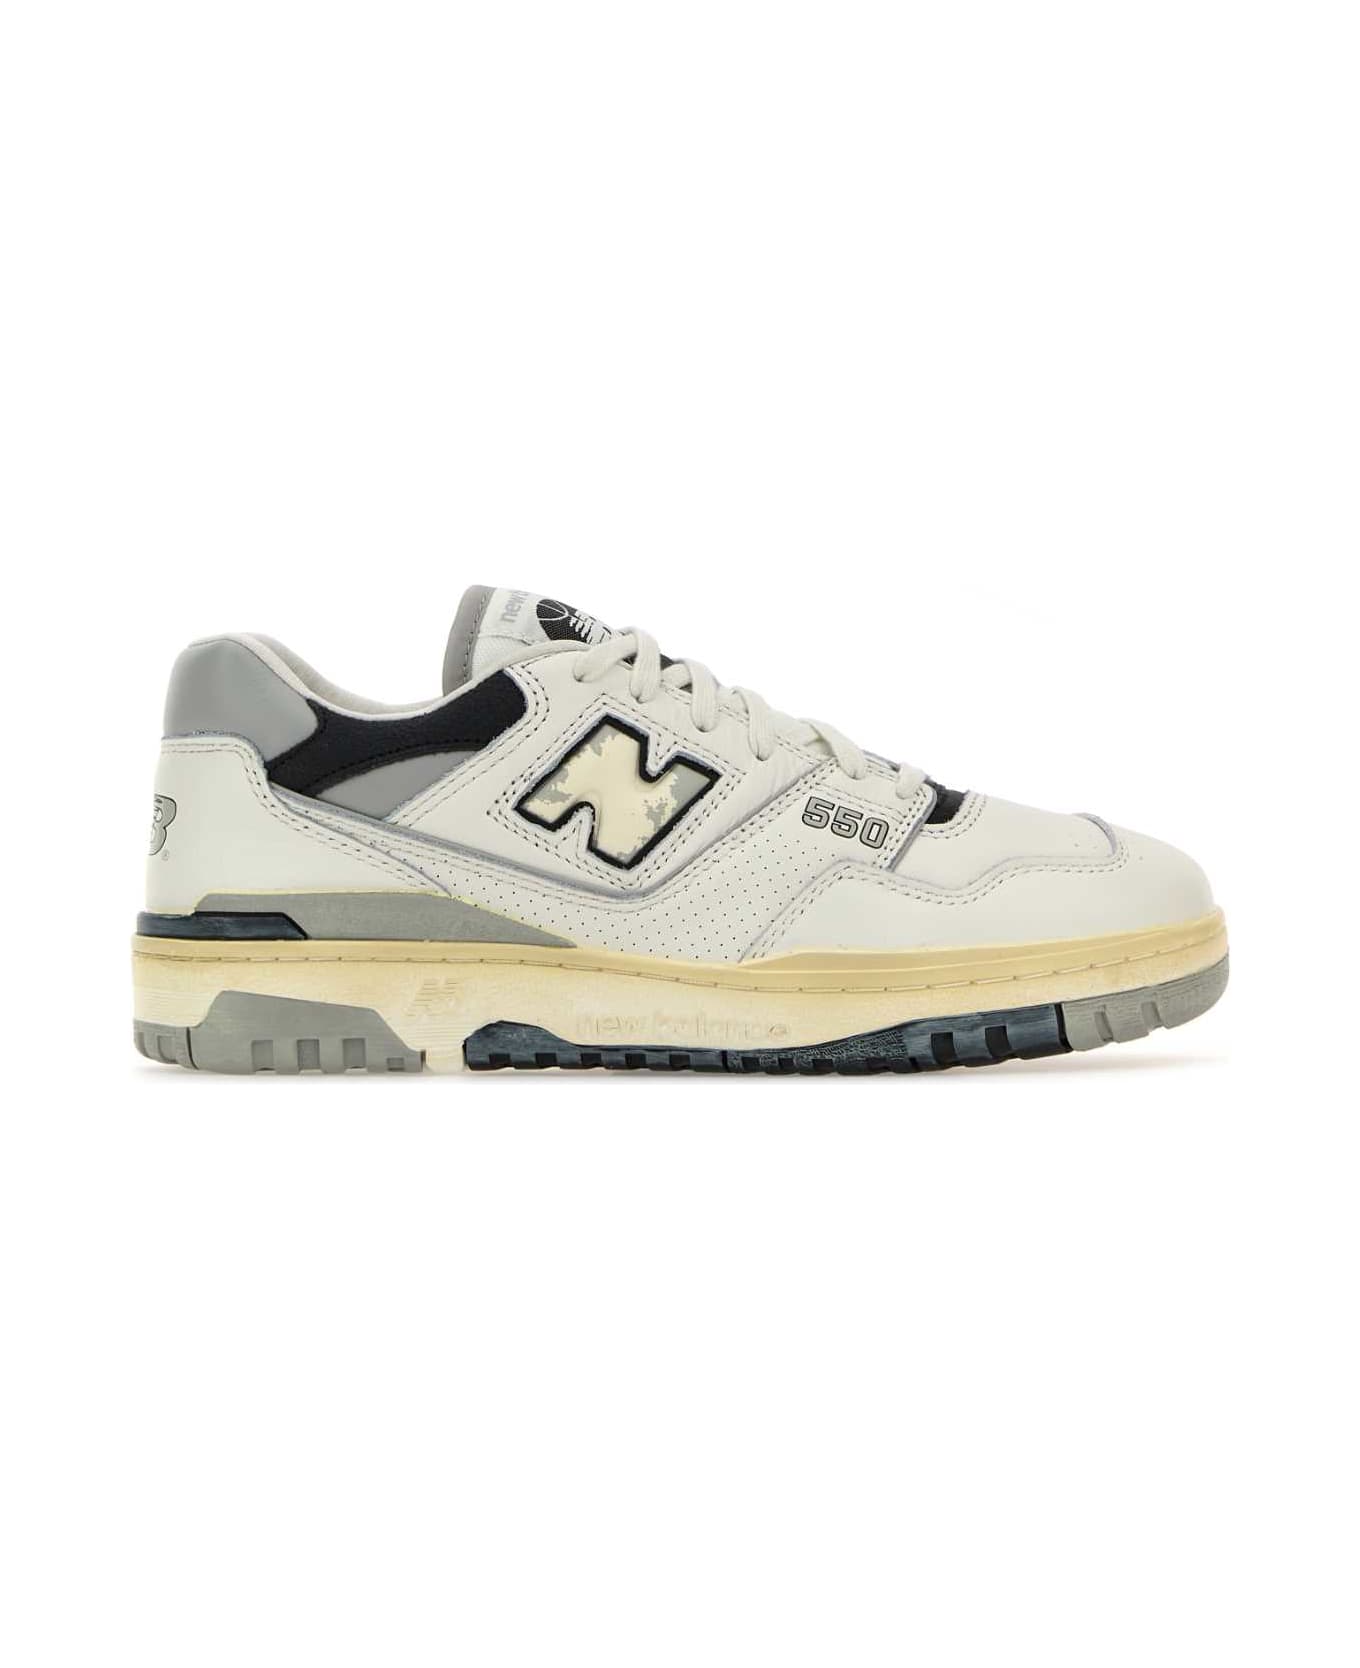 New Balance Multicolor Leather 550 Sneakers - OFFWHITEGREY スニーカー